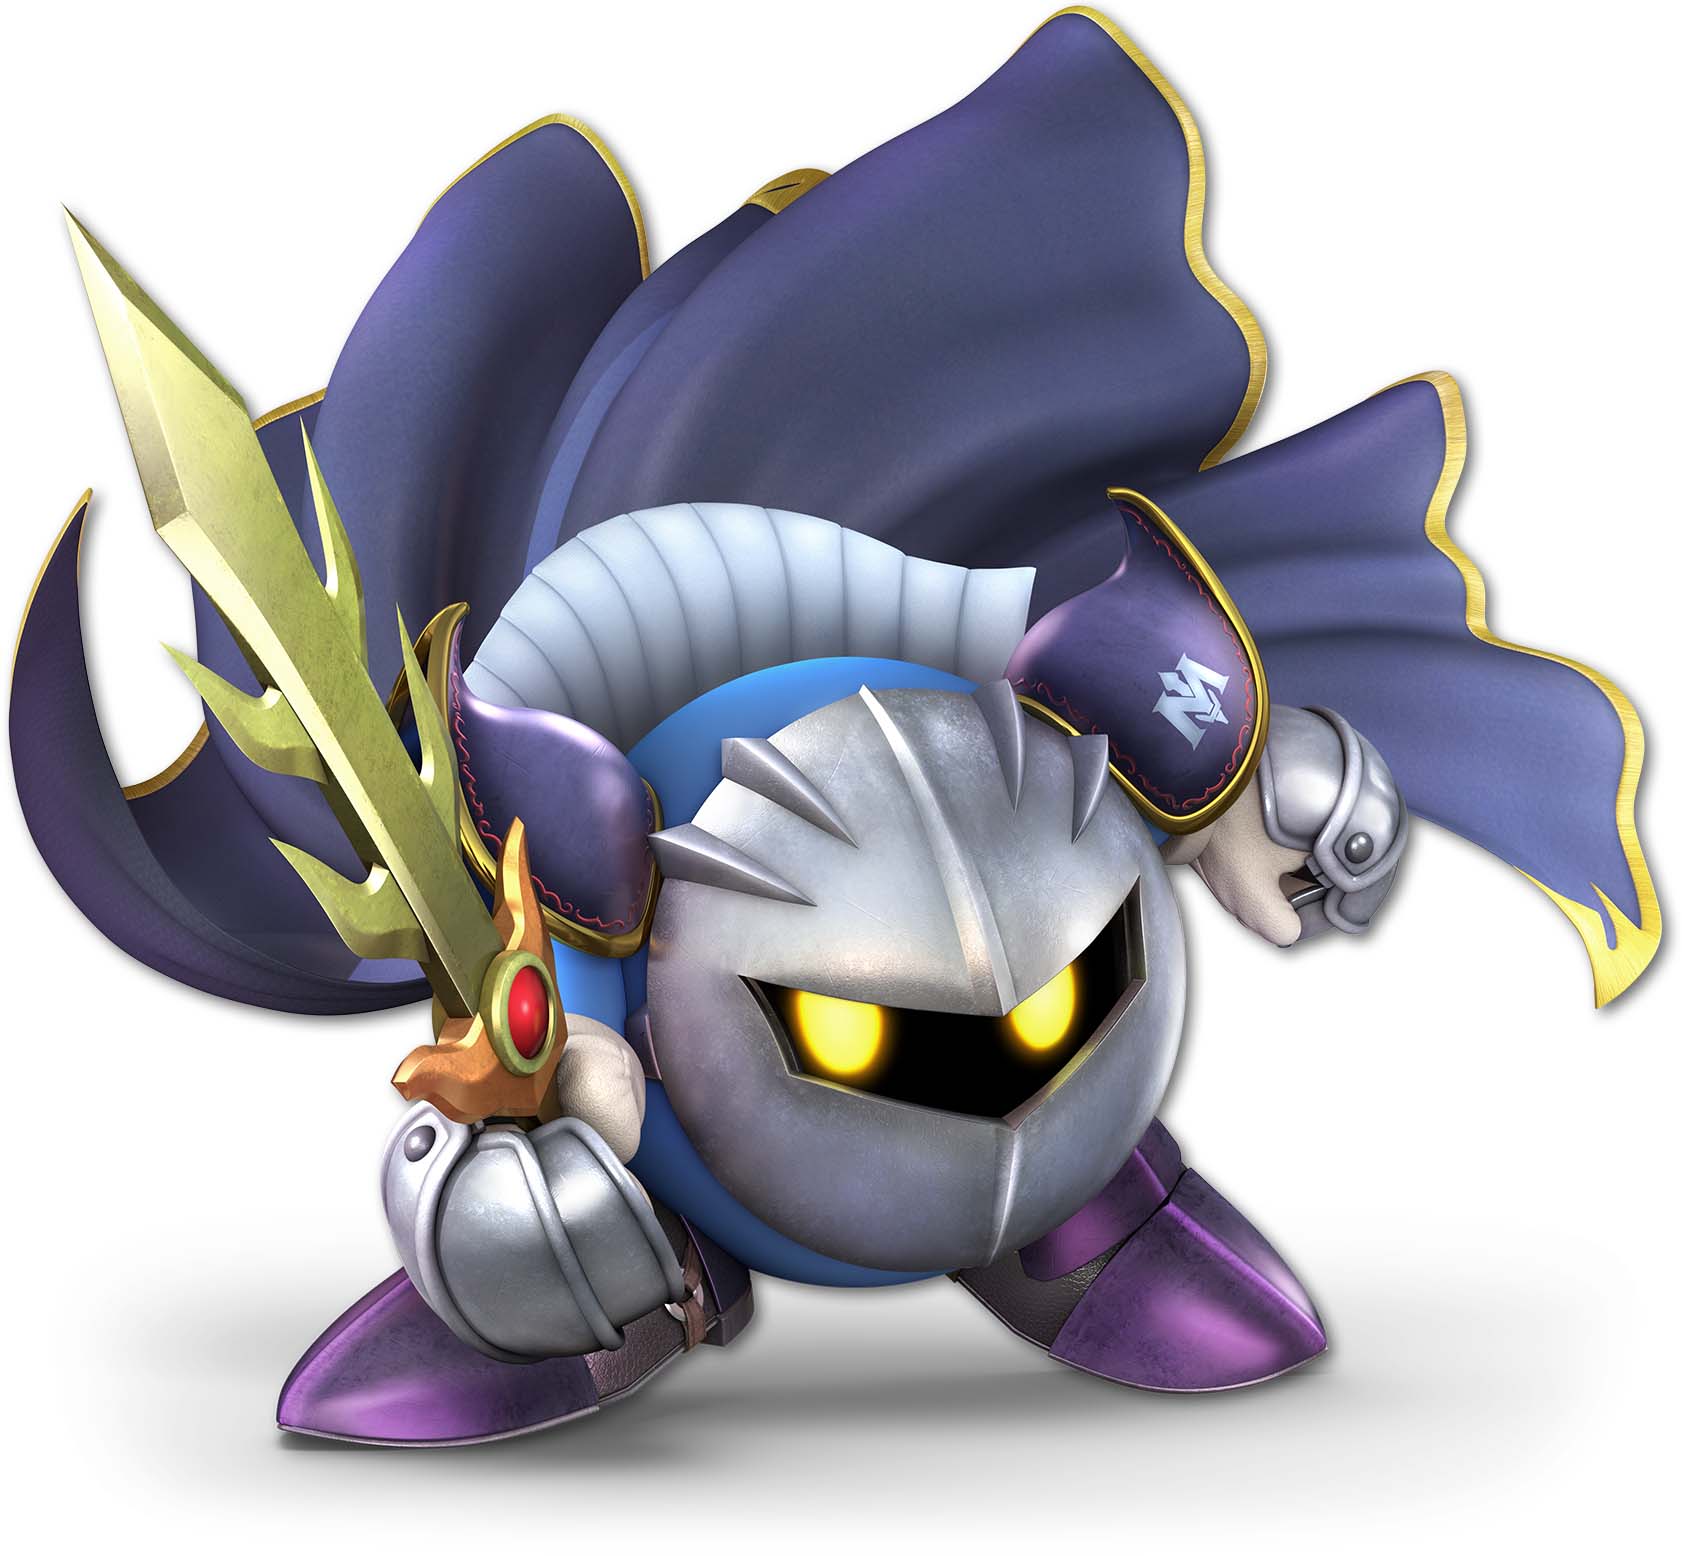 How to counter Meta Knight with Lucario in Super Smash Bros. Ultimate